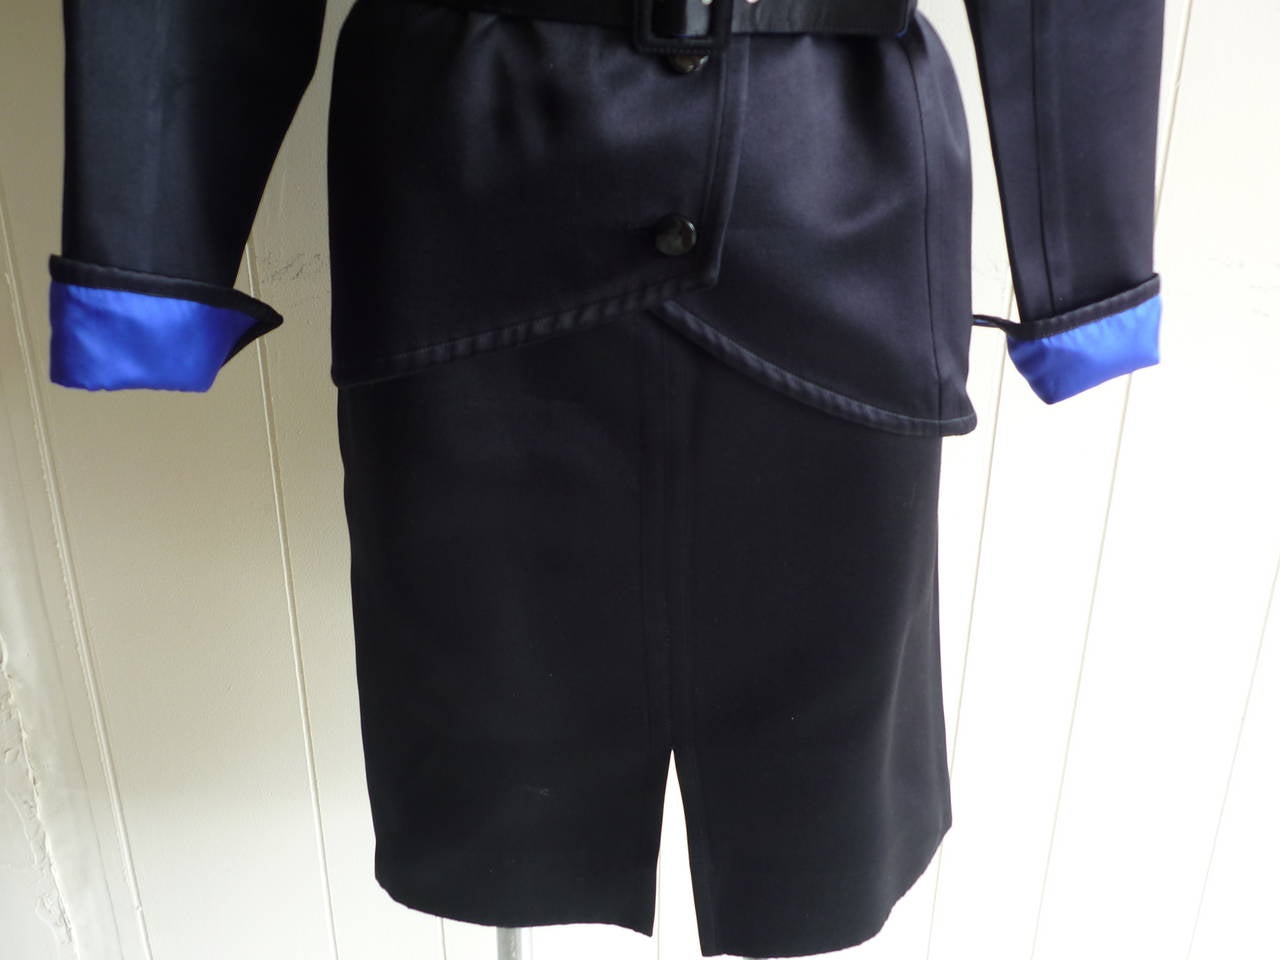 Great example of an Yves Saint Laurent RG 1980s piece: big shoulders; Russian style side closure and bonded royal blue lining. The jacket is belted and the skirt is straight with a slit in the middle front. There is some slight wear to the fabric.